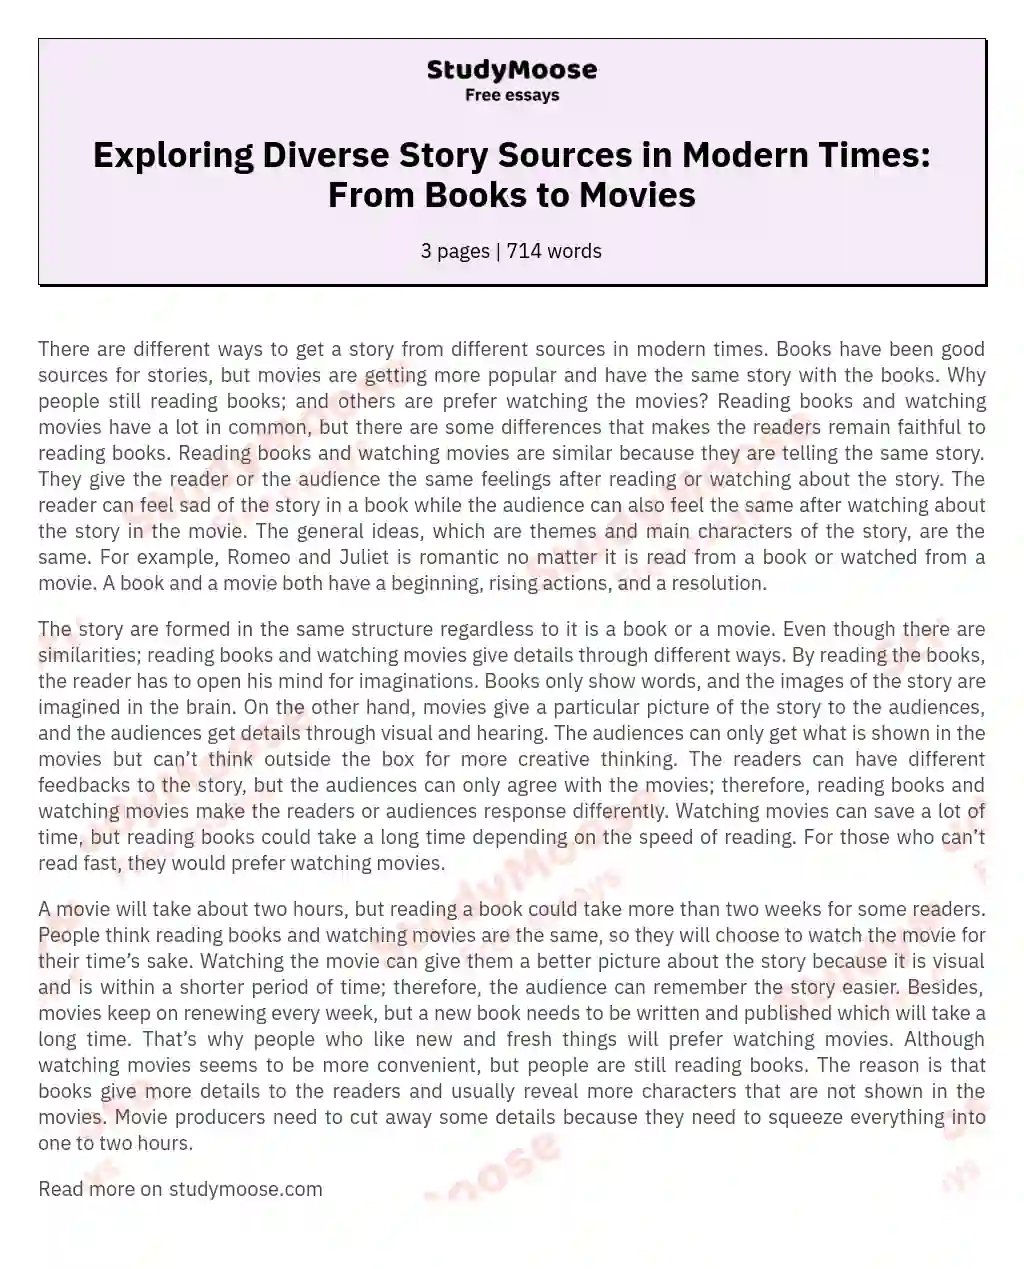 Exploring Diverse Story Sources in Modern Times: From Books to Movies essay